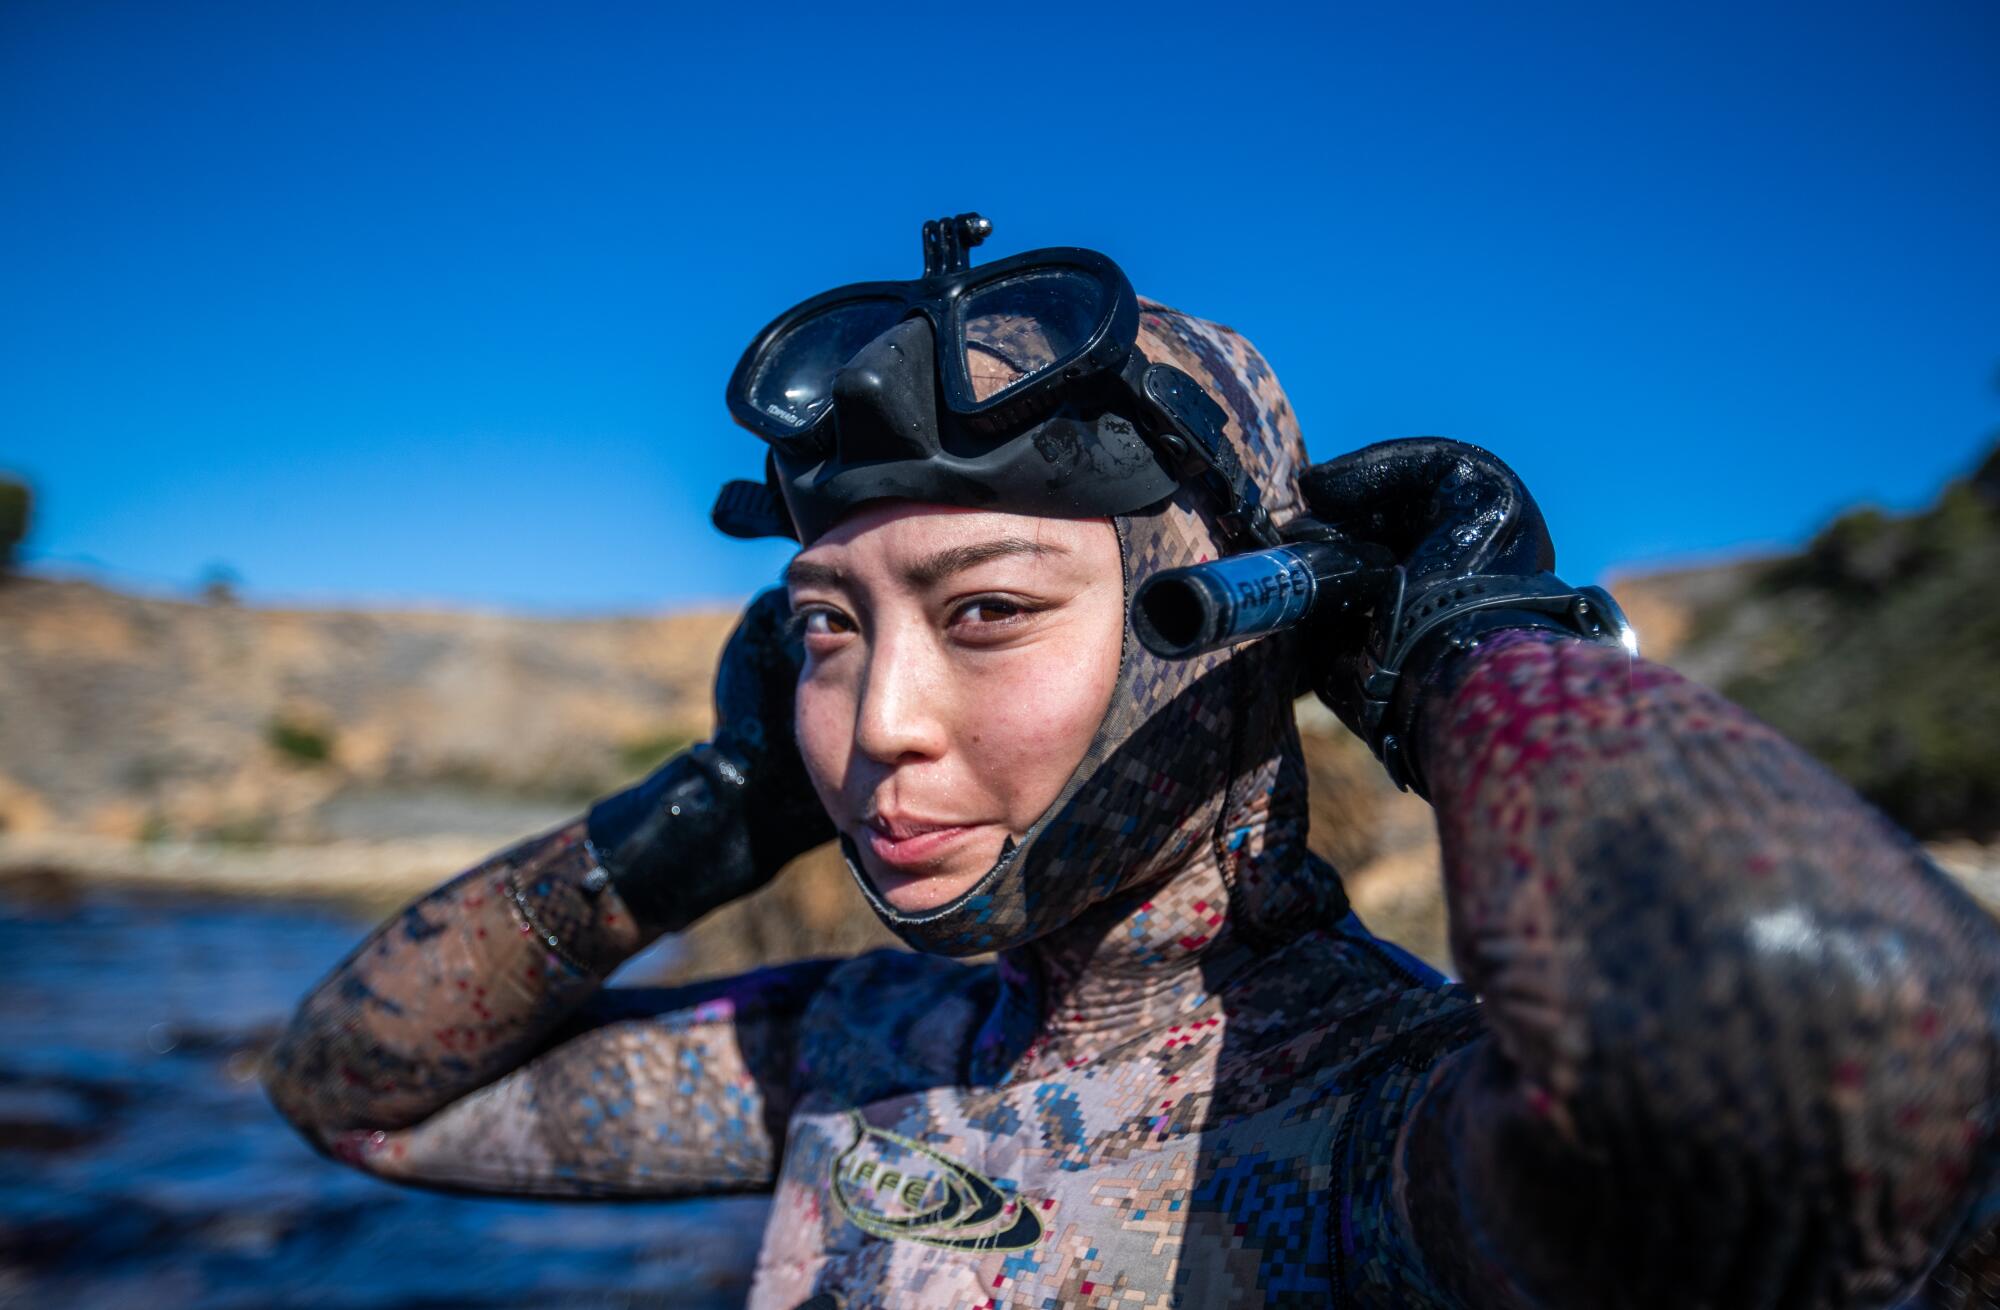 Spearfishing champ blazes trails for women divers, sustainability - Los  Angeles Times